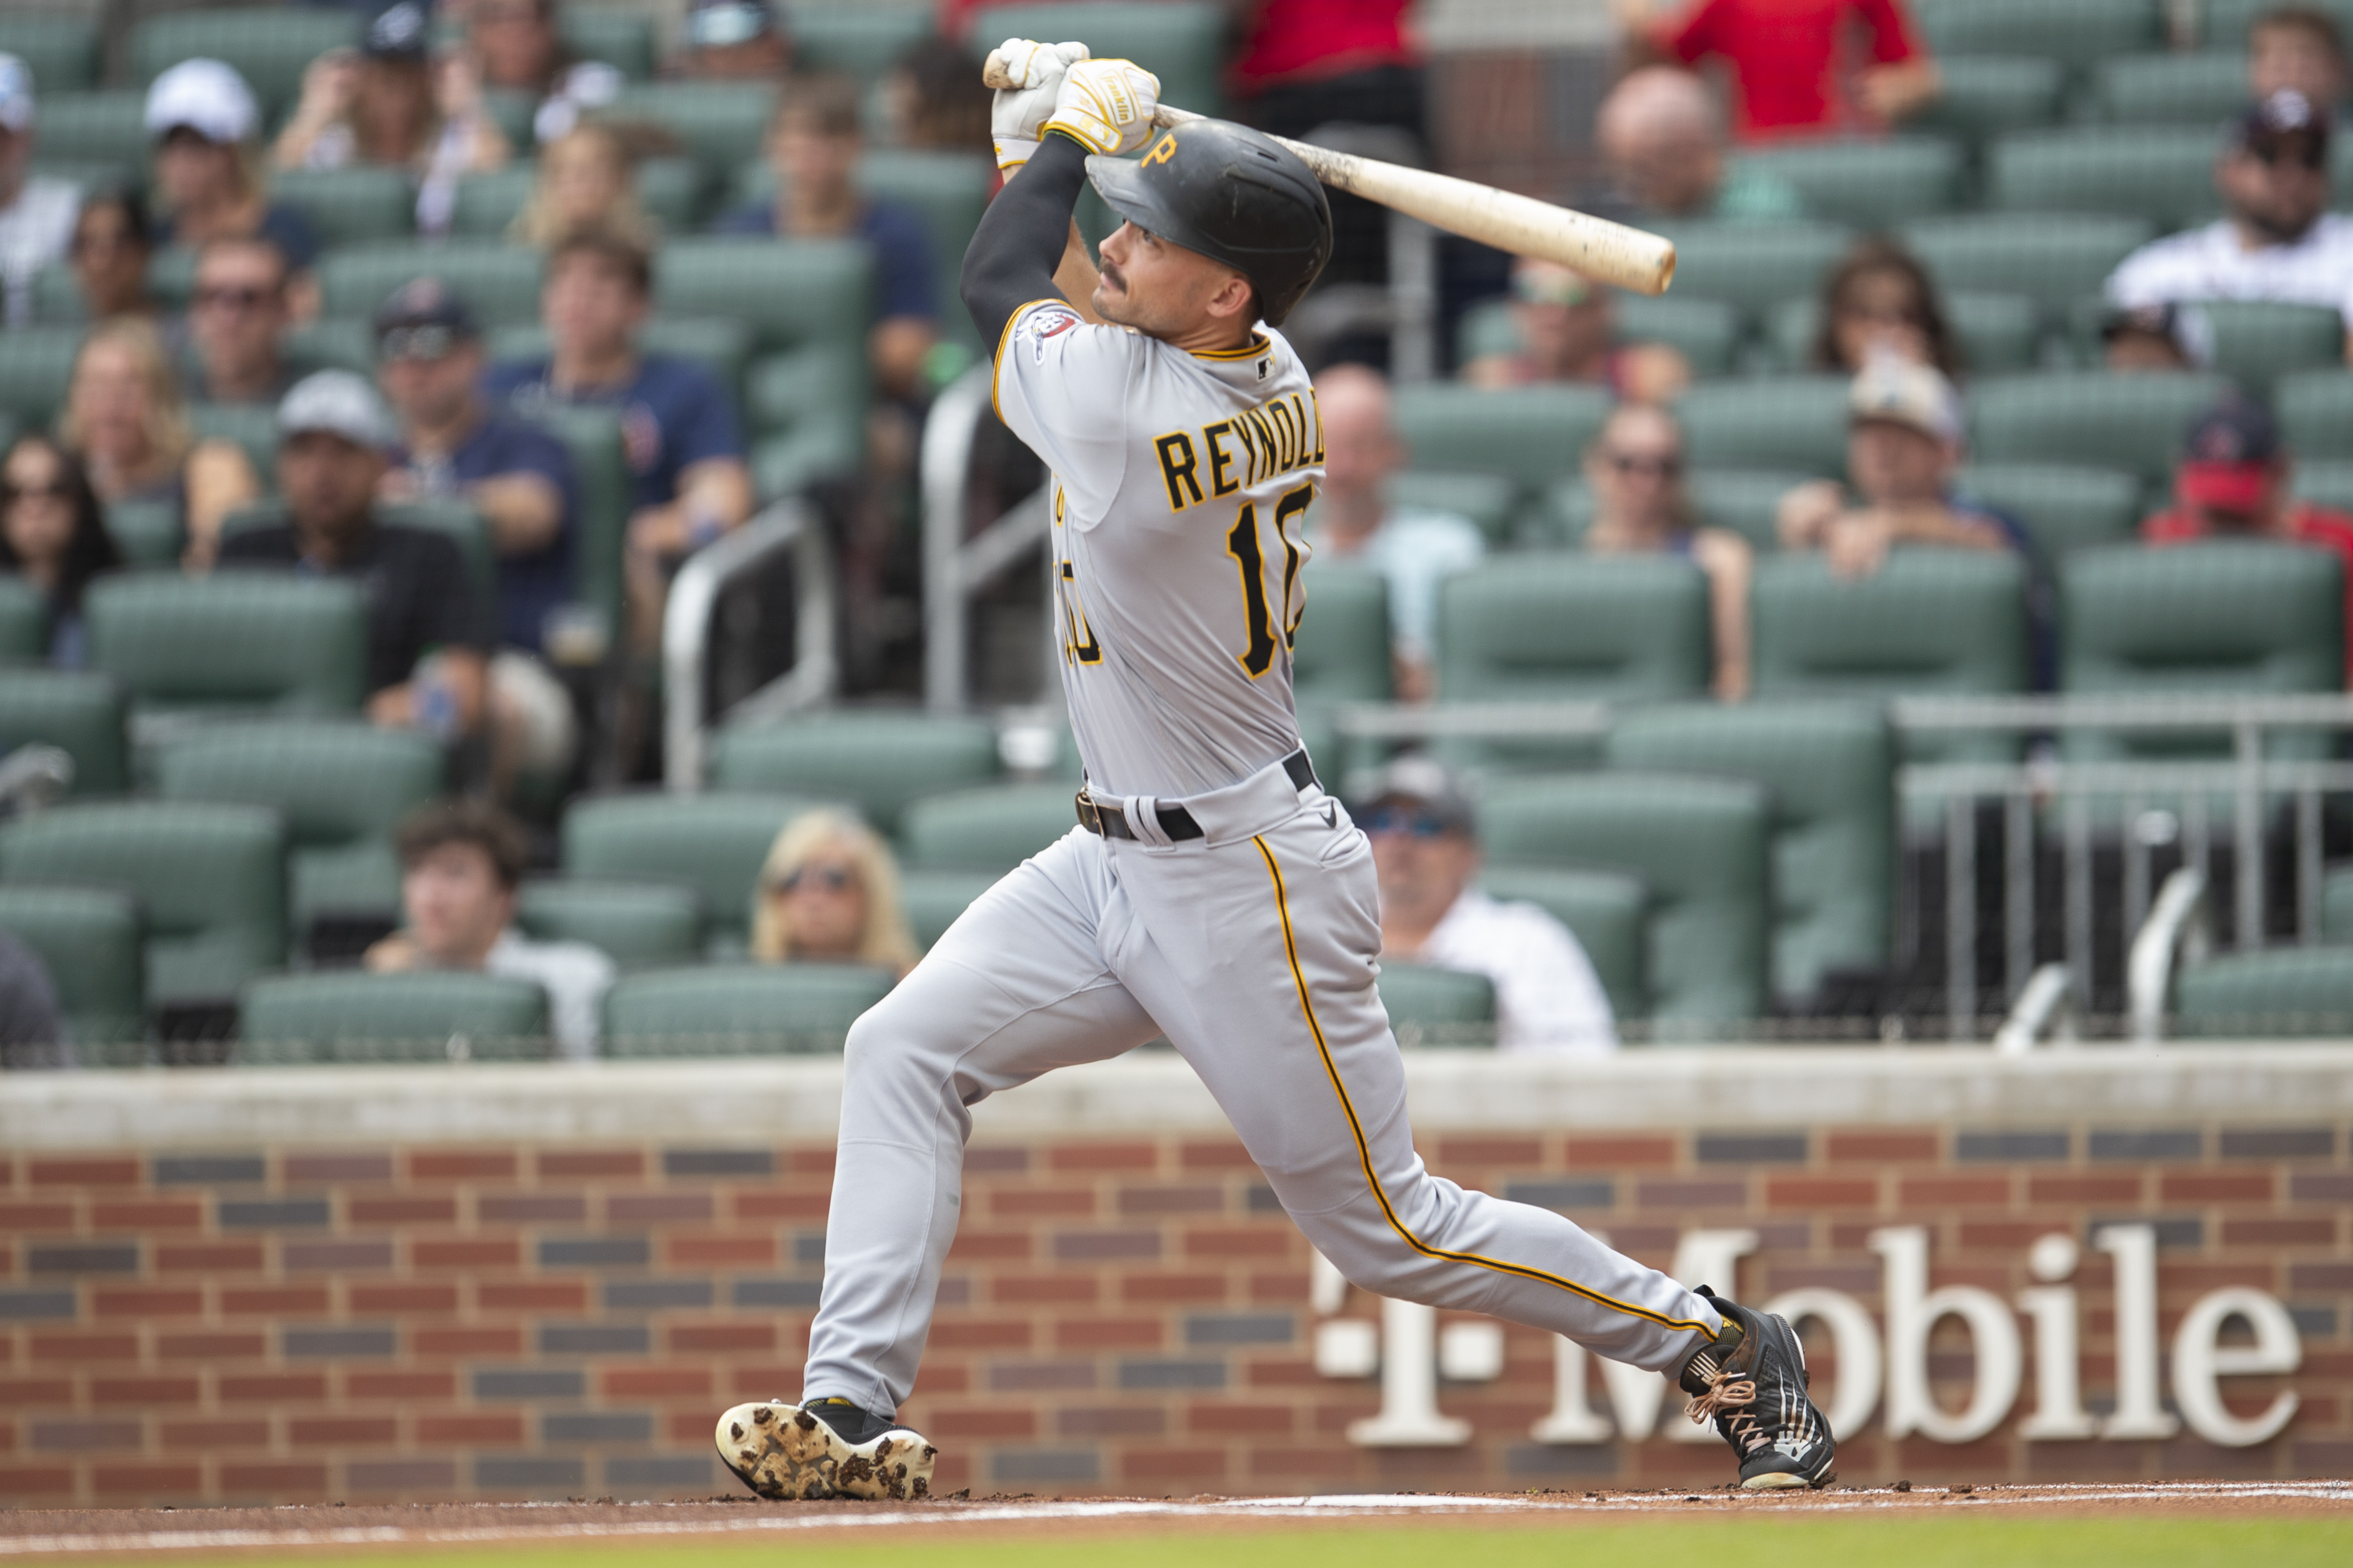 Sources: Pirates, Bryan Reynolds reach agreement on long-term